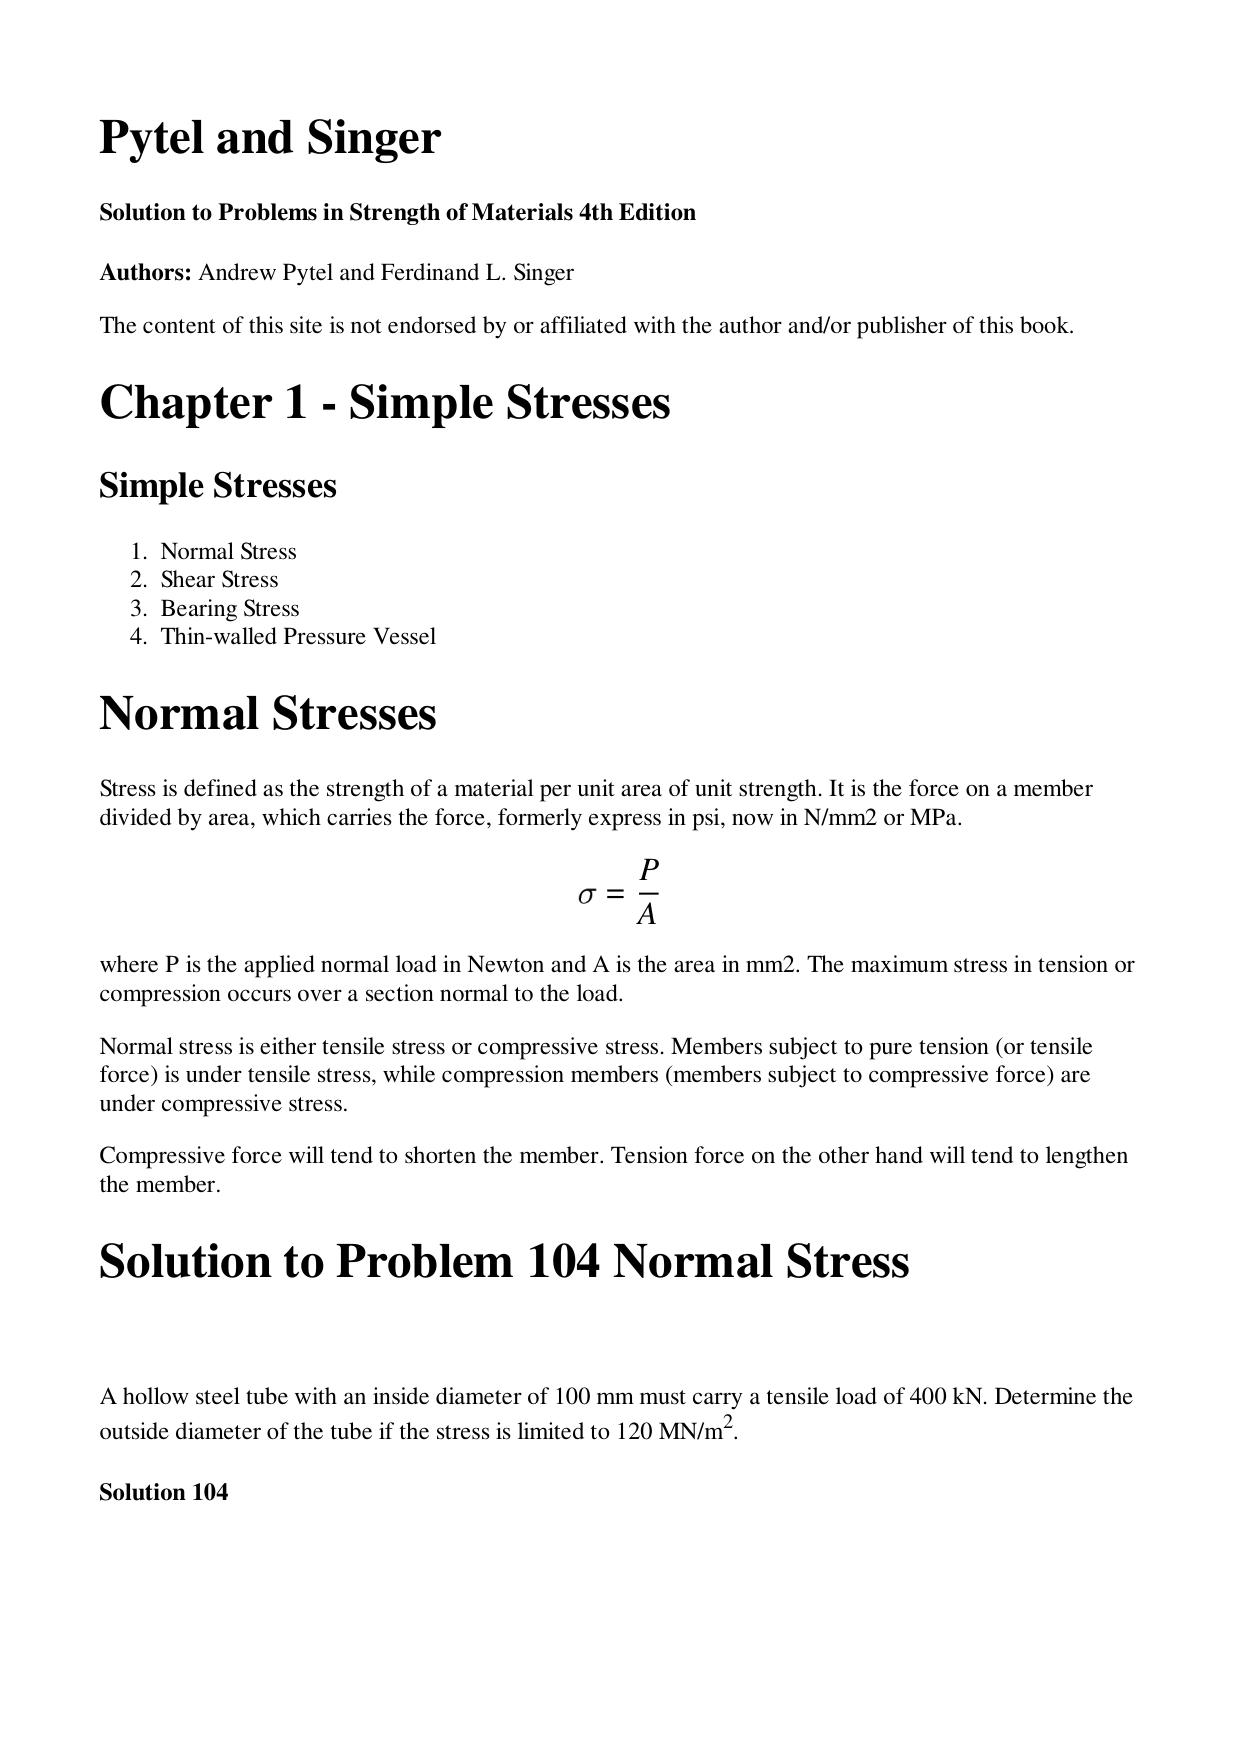 Strength of Material Fourth Edition By Andrew Pytel, Ferdinand L.Singer Chapter1-5